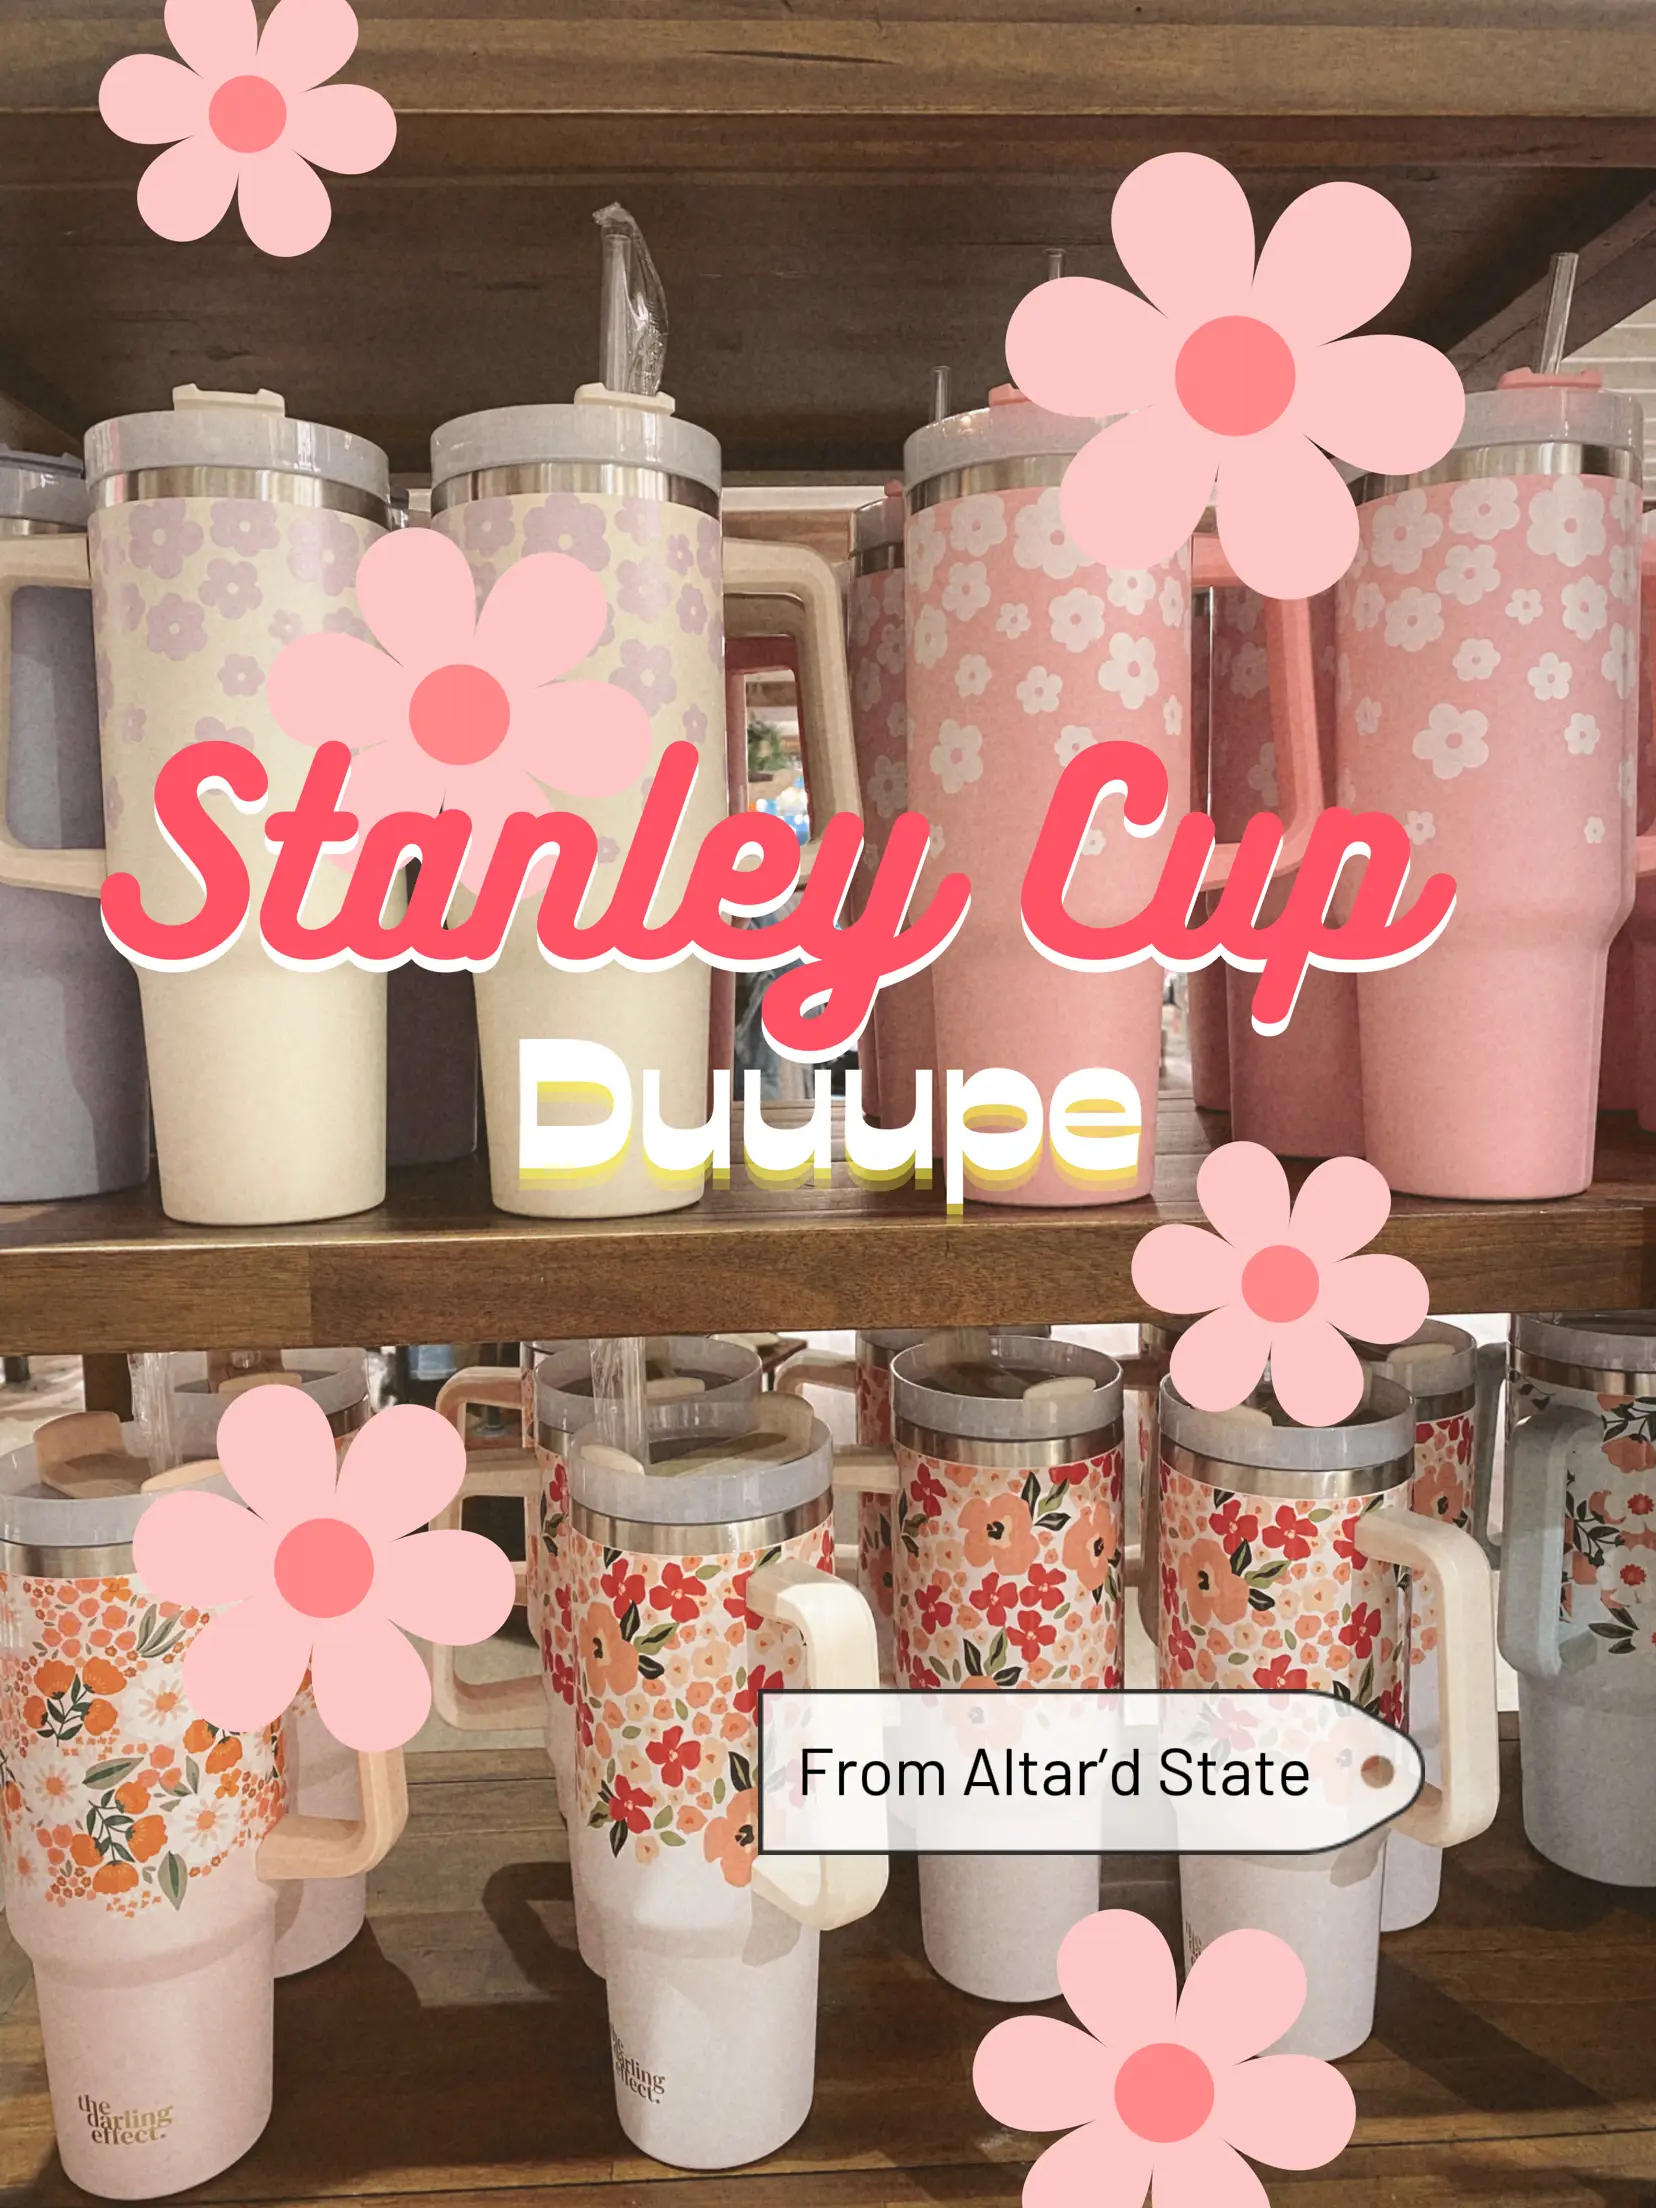 Stanley cup dupes - Lemon8 Search